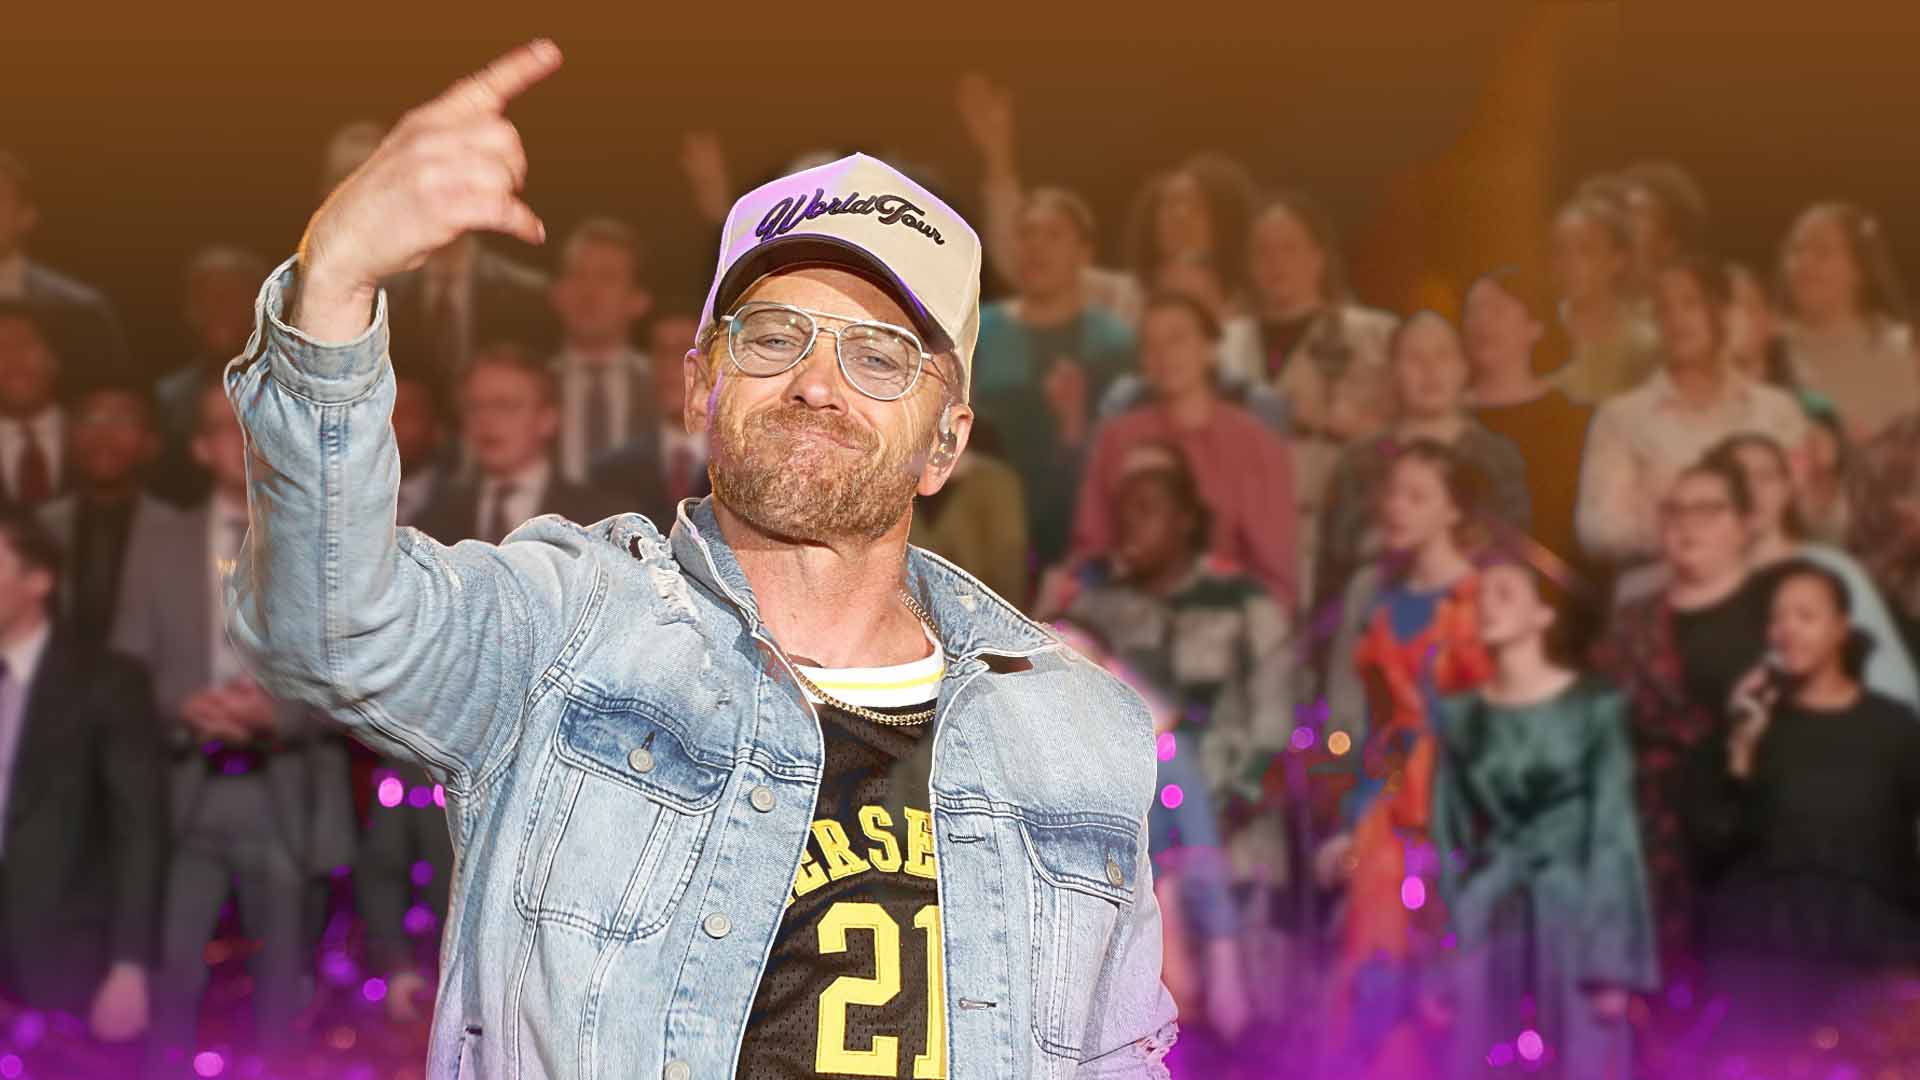 TobyMac Releases 'Help Is On The Way (Maybe Midnight)